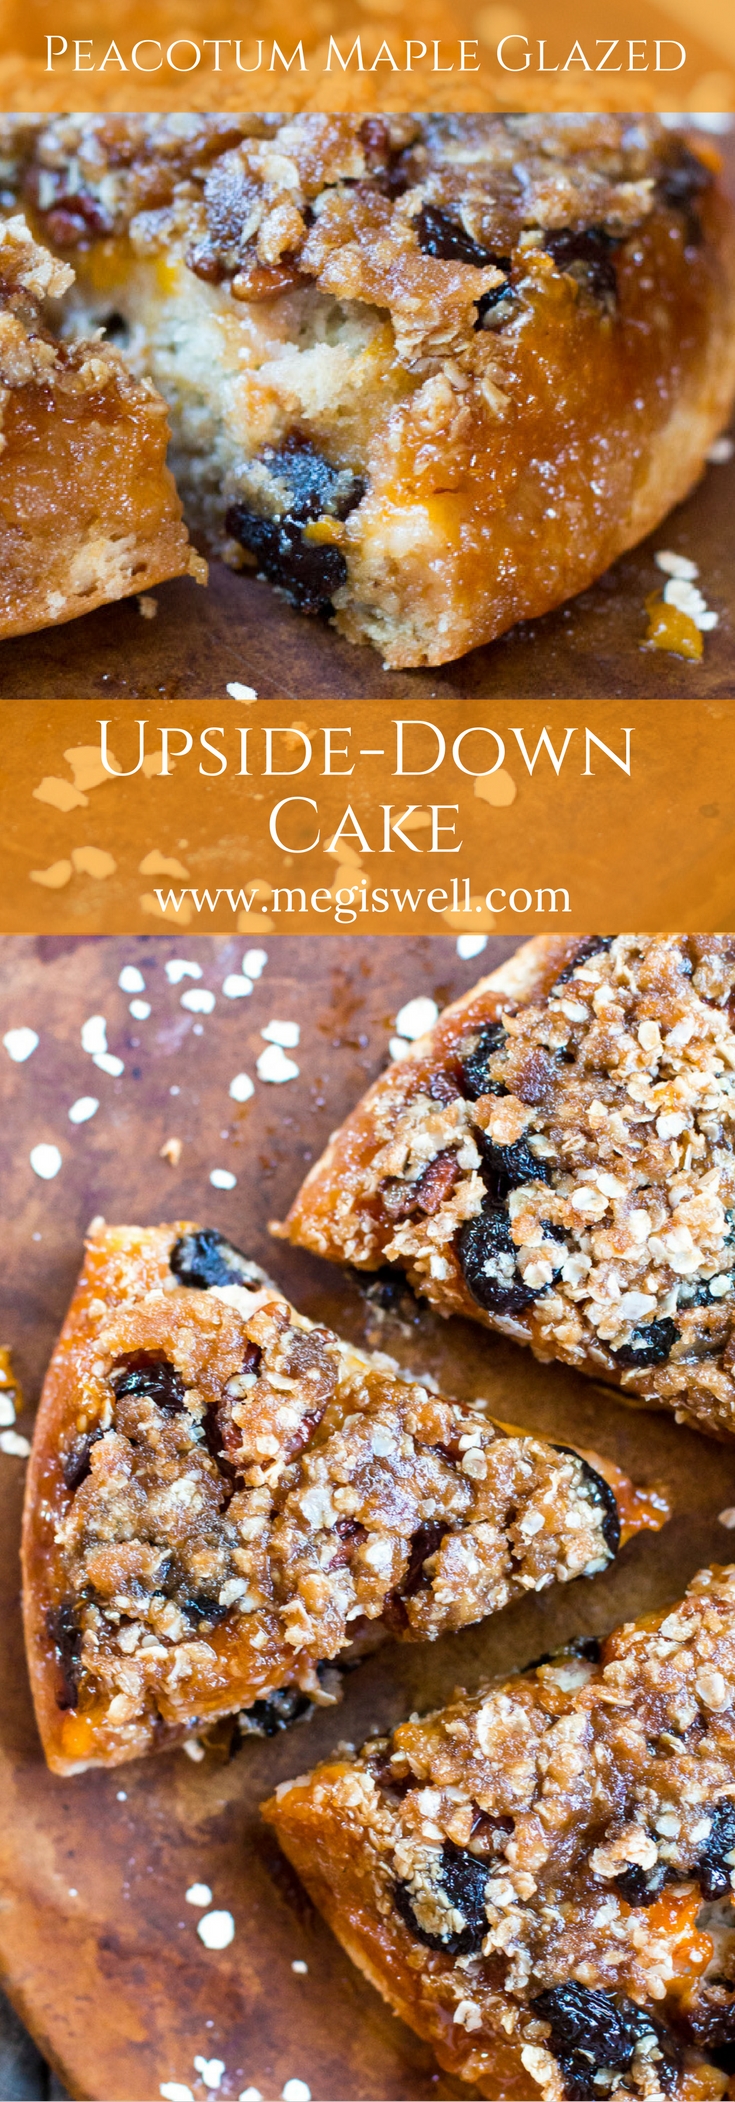 This Peacotum Maple Glazed Upside-Down Cake is wonderful to wake up to! The crumbly buttermilk cake has an amazing glazed top of dried cherries, brown sugar, cinnamon and spice oatmeal, maple syrup, peacotums, and pecans. | www.megiswell.com